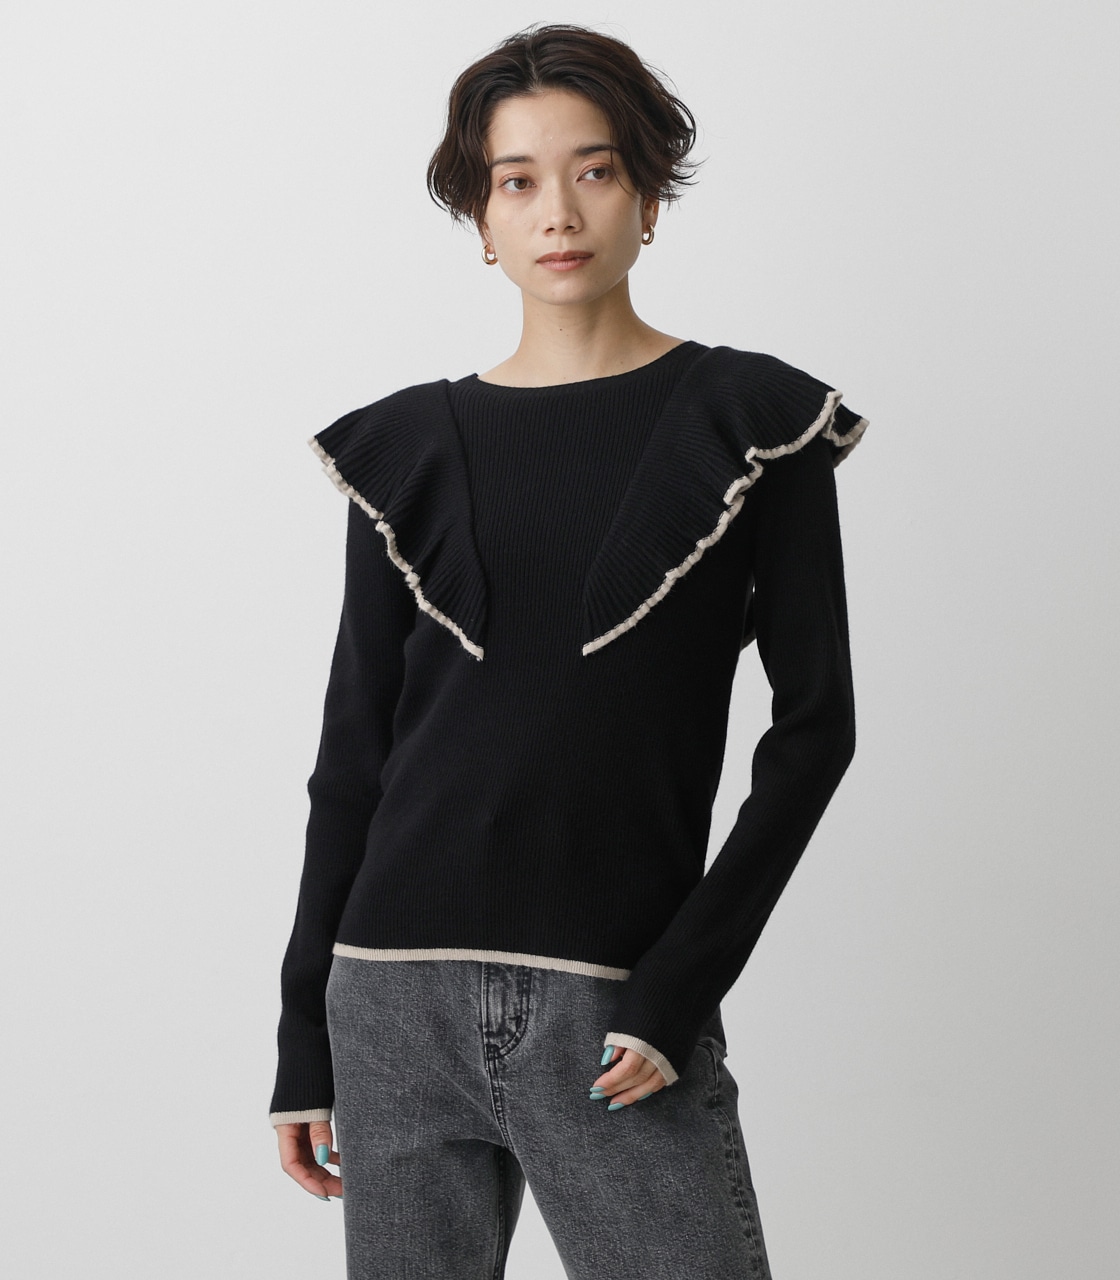 FRONT FRILLED KNIT TOPS/フロントフリルニットトップス 詳細画像 BLK 5